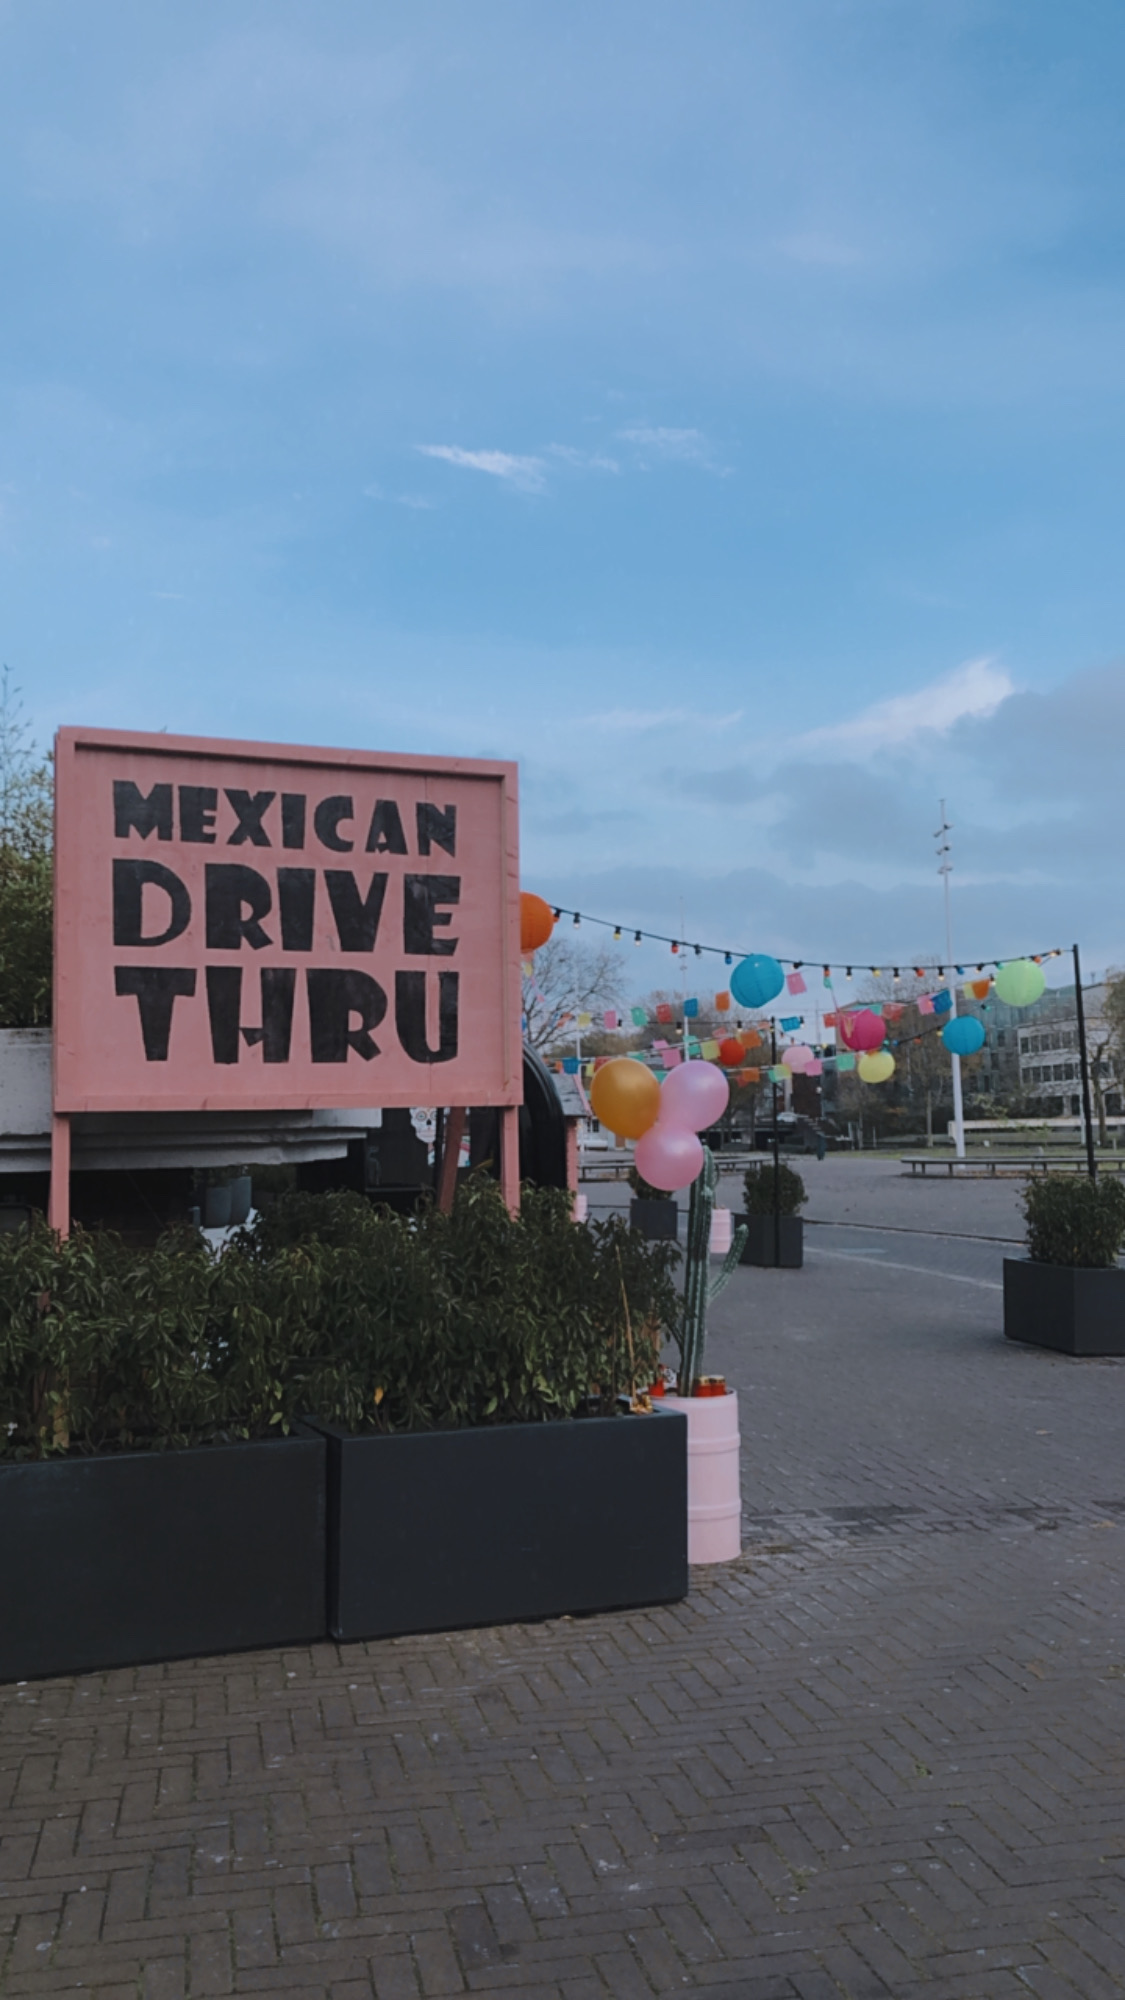 drive ins nederland - coronaproof drive-thrus in Nederland - drive-in bioscoop - drive-thru nederland - drive-thru amsterdam - mexican drive thru amsterdam - mexican drive thru amsterdam